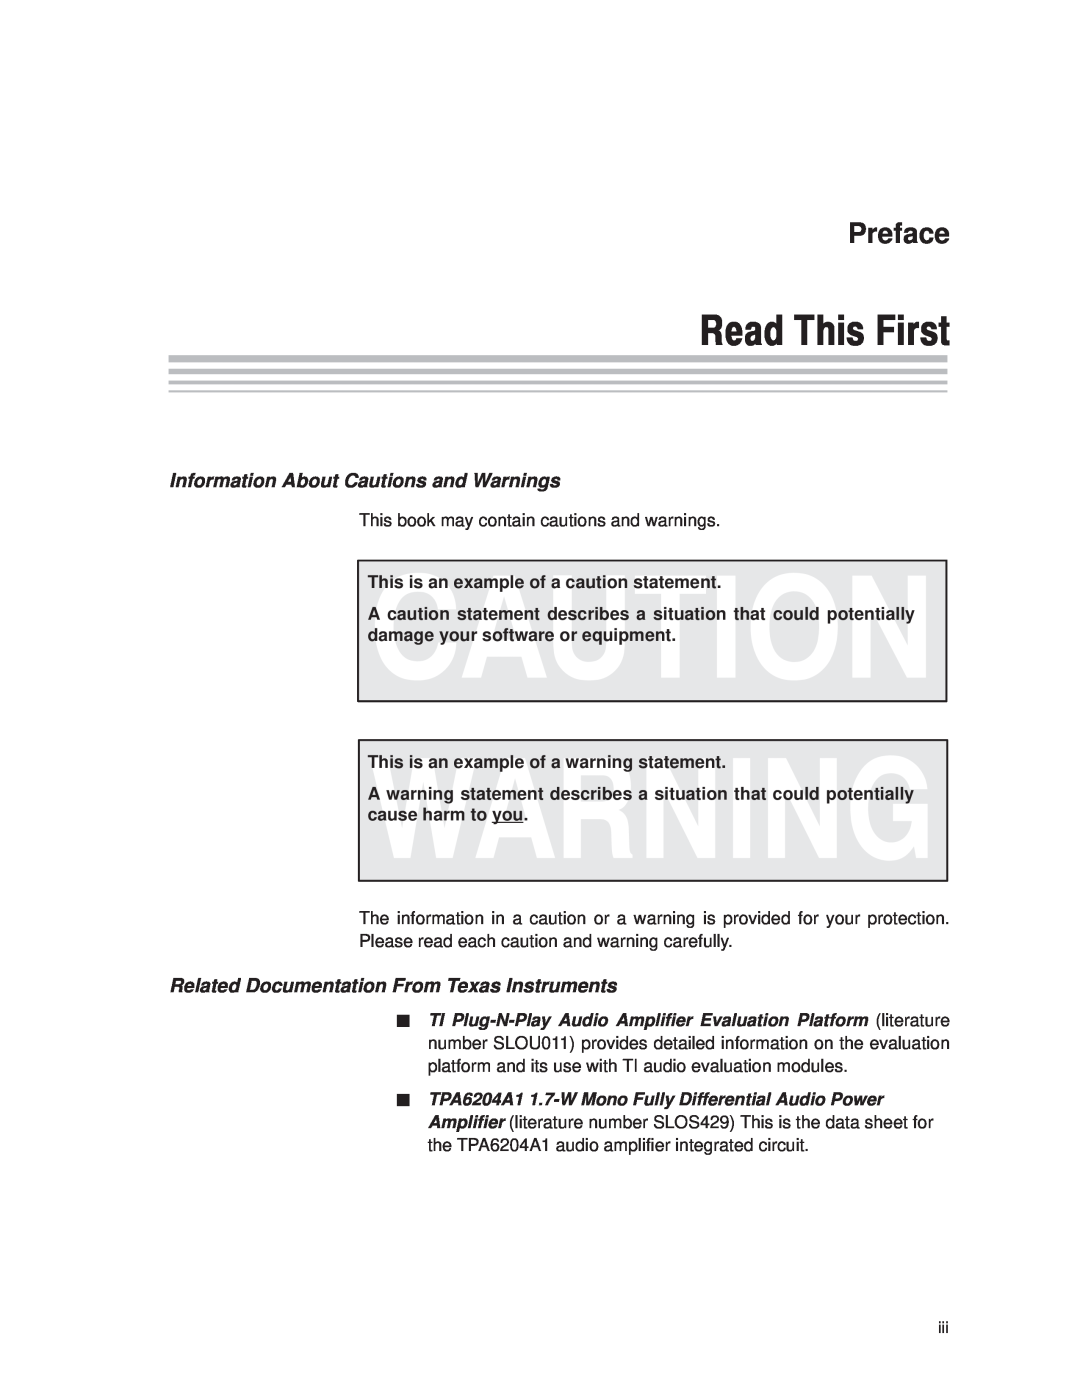 Texas Instruments TPA6204A1 manual Read This First, Information About Cautions and Warnings, Preface 